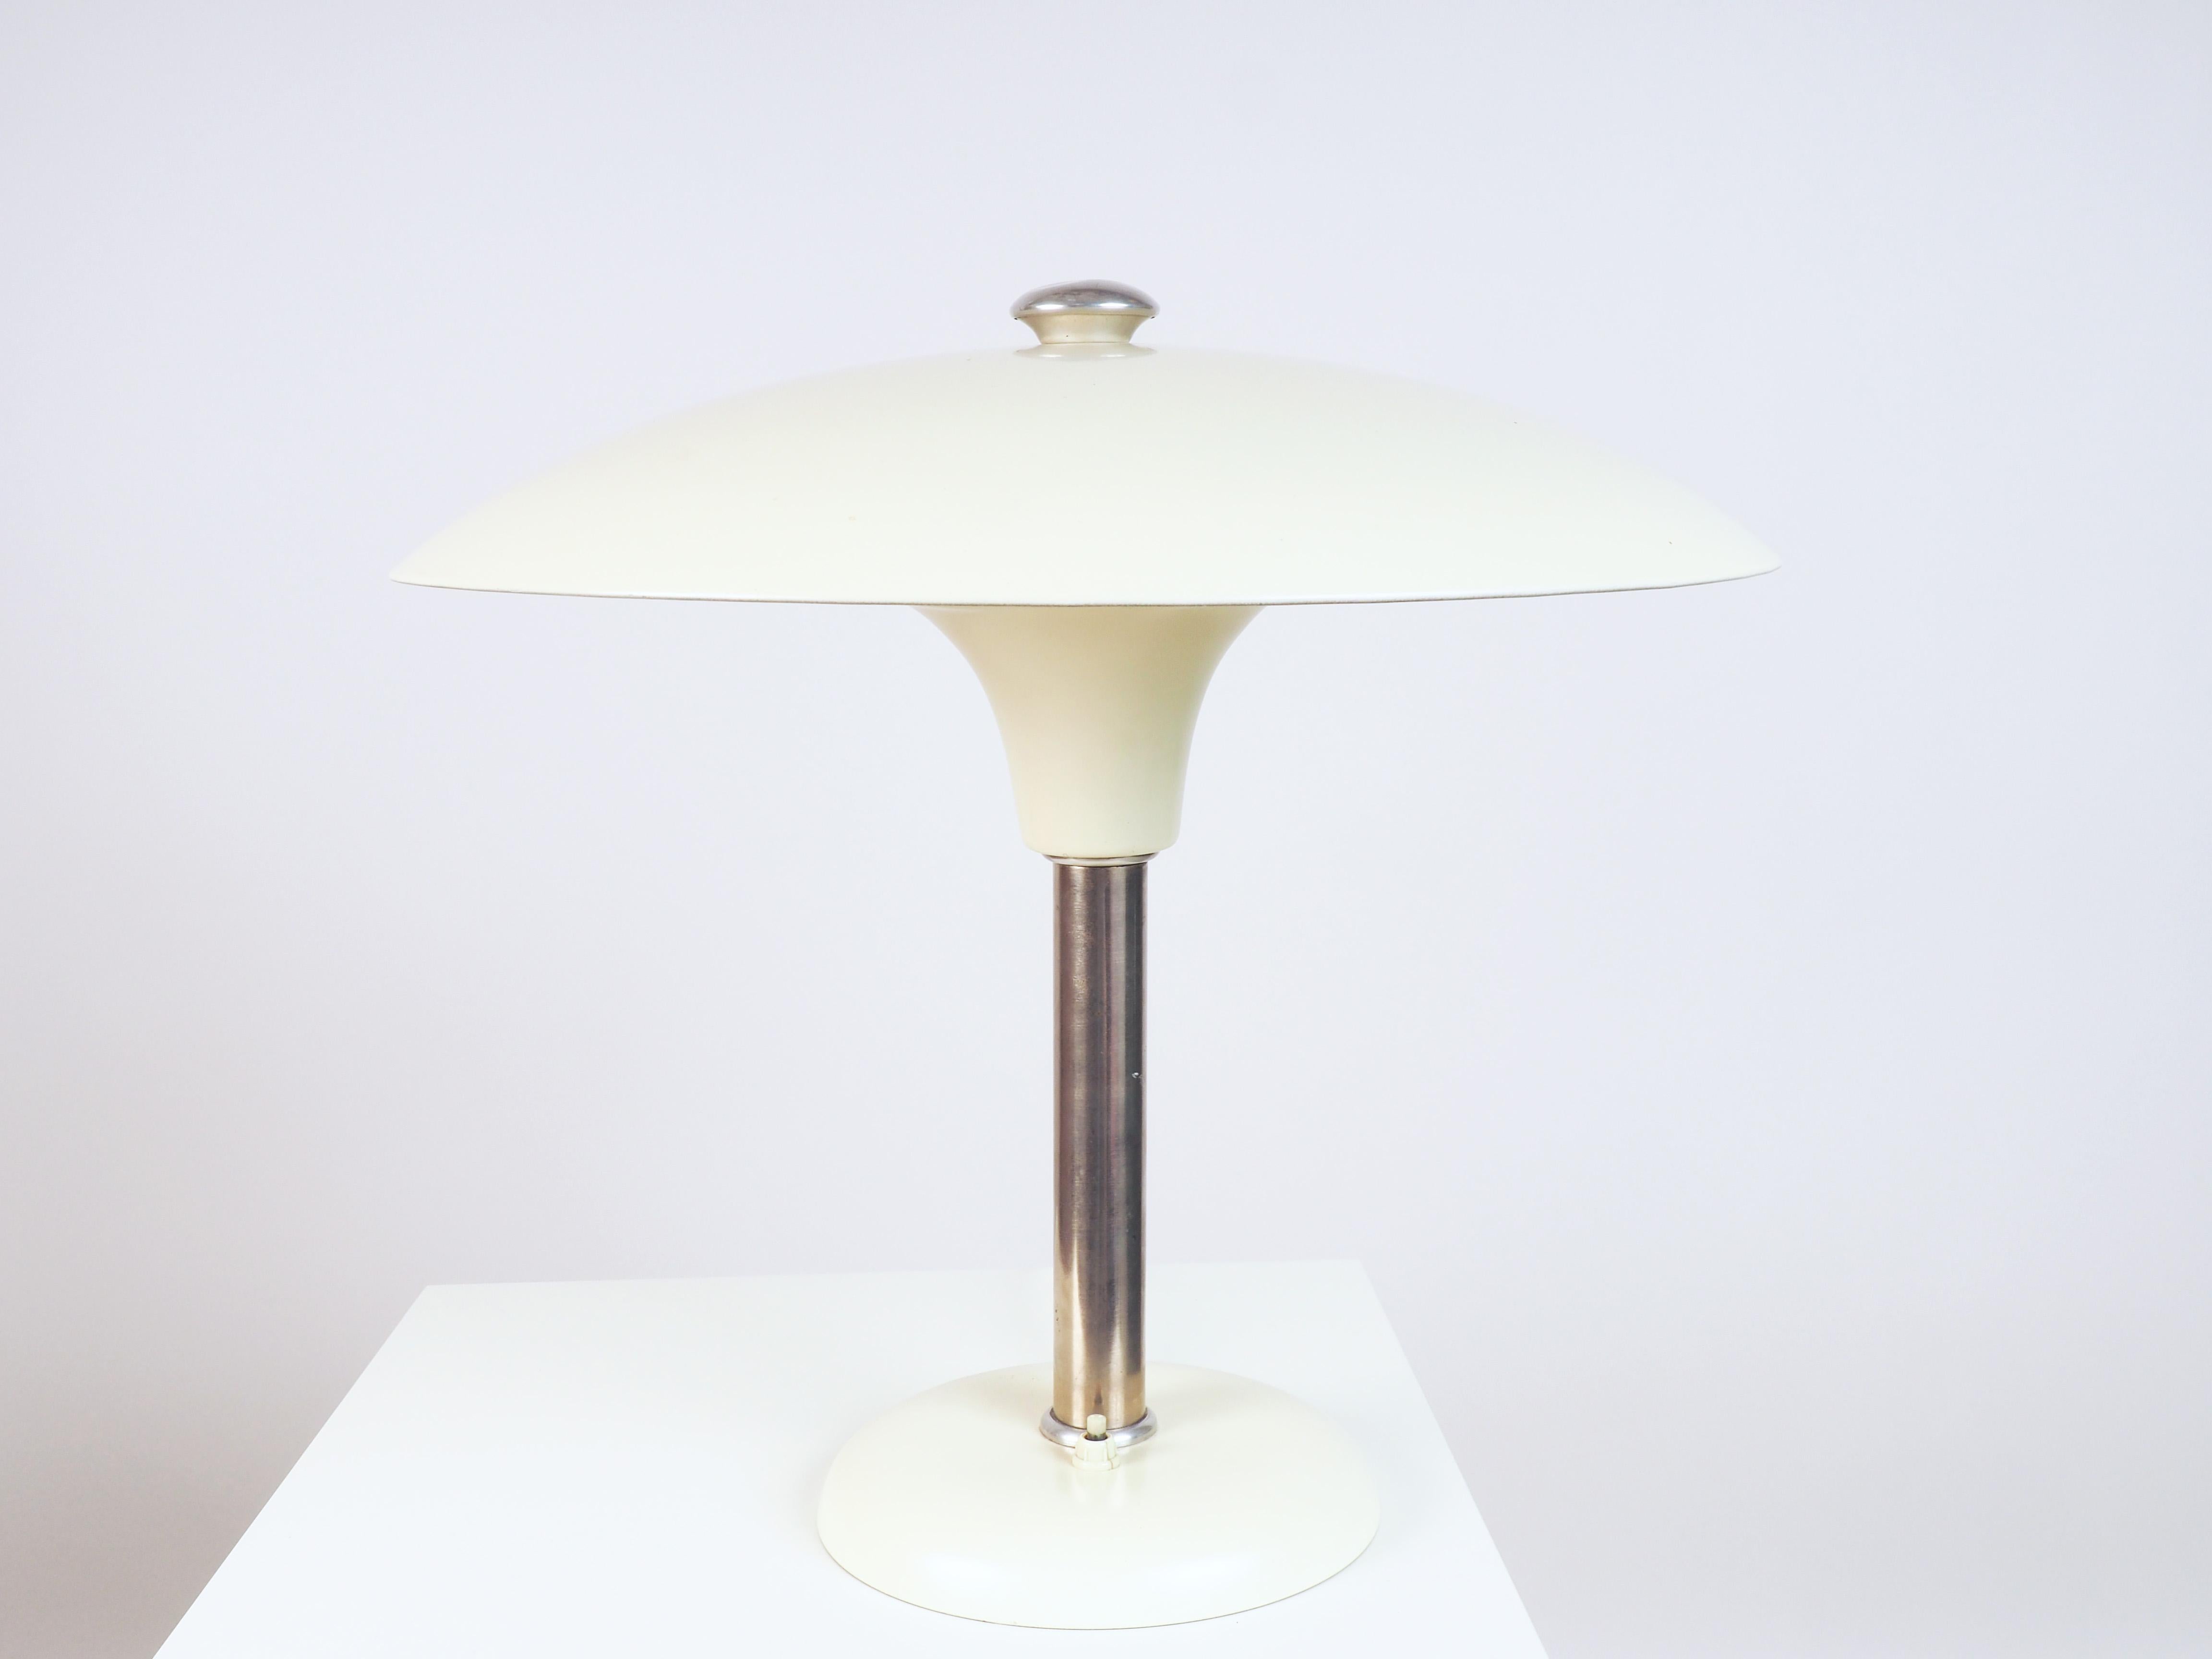 Rare Bauhaus table lamp designed by Max Schumacher and produced by Werner Schroeder, Lobenstein, Germany.
Marked underneath MSW.